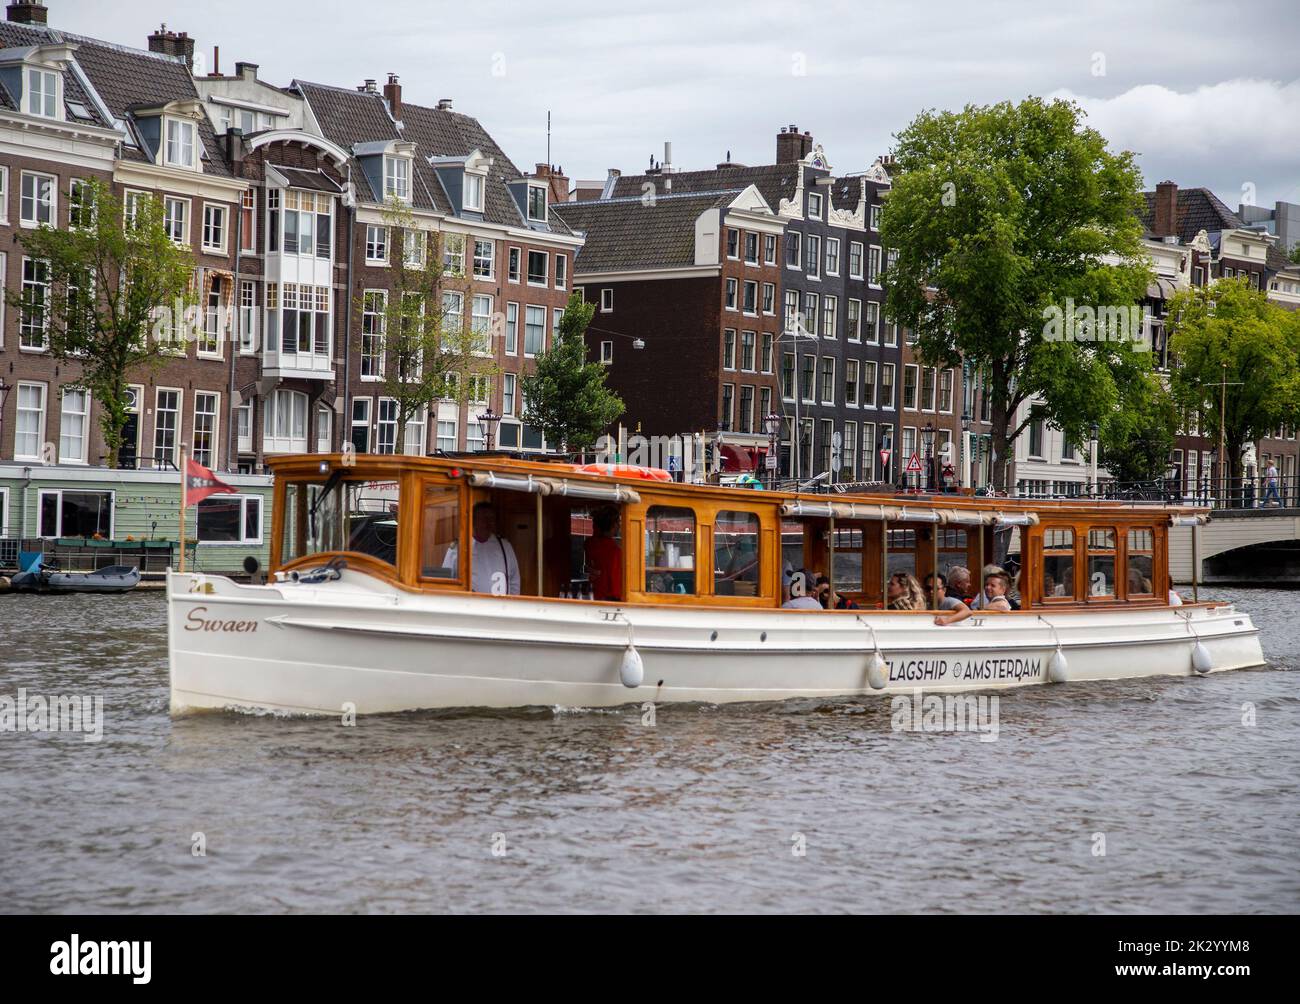 Barges on an Amsterdam canal Stock Photo